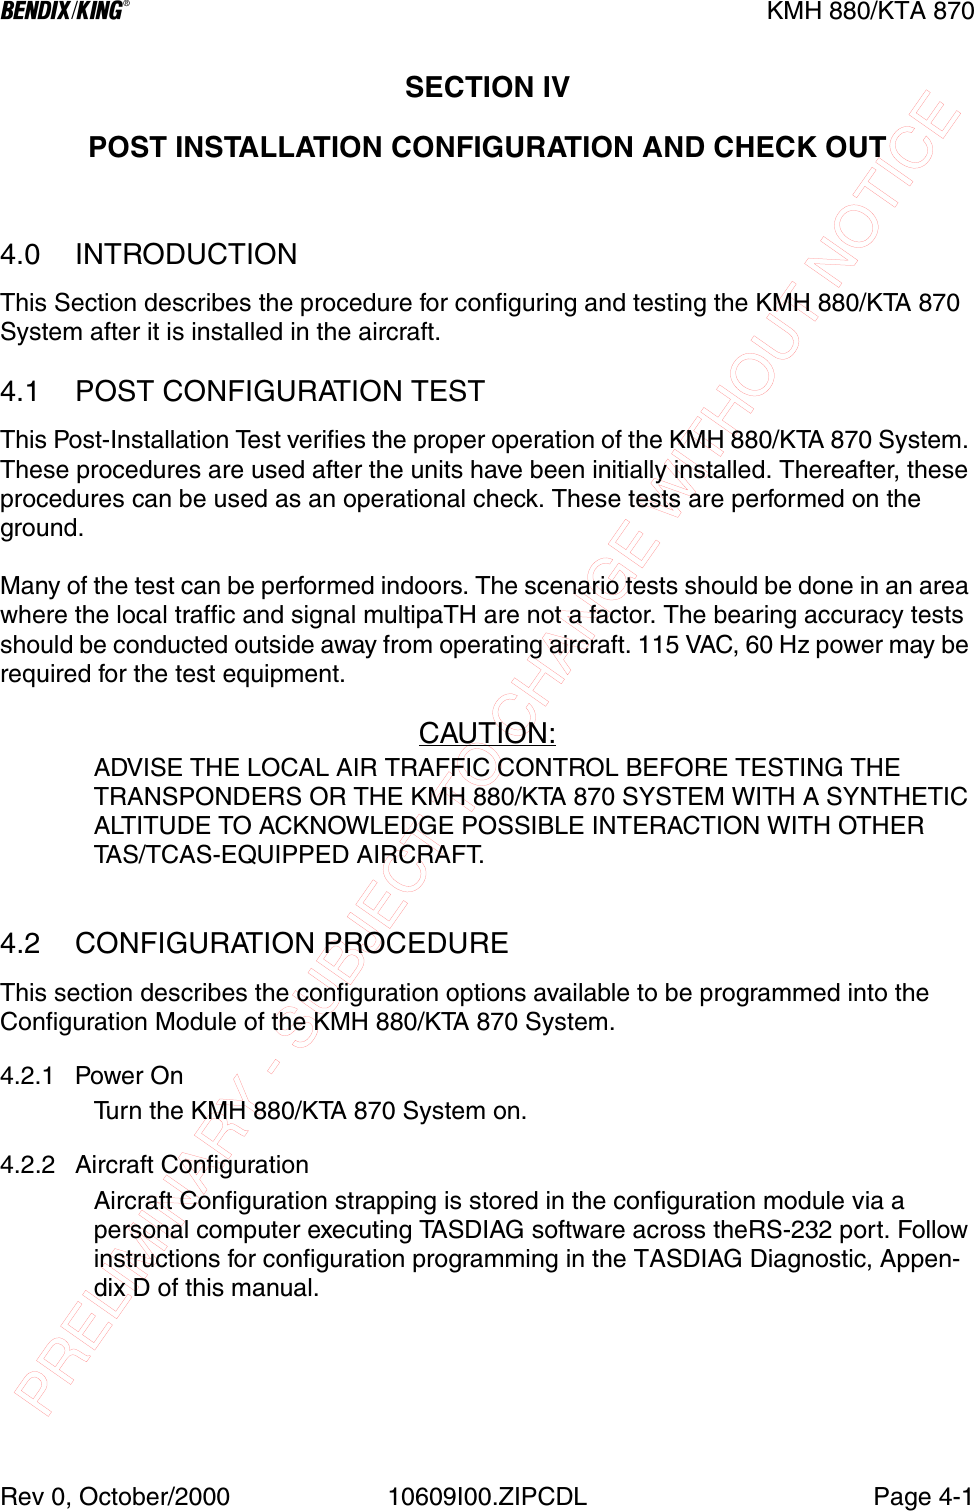 PRELIMINARY - SUBJECT TO CHANGE WITHOUT NOTICEBKMH 880/KTA 870Rev 0, October/2000 10609I00.ZIPCDL Page 4-1SECTION IVPOST INSTALLATION CONFIGURATION AND CHECK OUT4.0 INTRODUCTIONThis Section describes the procedure for configuring and testing the KMH 880/KTA 870  System after it is installed in the aircraft.4.1 POST CONFIGURATION TESTThis Post-Installation Test verifies the proper operation of the KMH 880/KTA 870 System. These procedures are used after the units have been initially installed. Thereafter, these procedures can be used as an operational check. These tests are performed on the ground.Many of the test can be performed indoors. The scenario tests should be done in an area where the local traffic and signal multipaTH are not a factor. The bearing accuracy tests should be conducted outside away from operating aircraft. 115 VAC, 60 Hz power may be required for the test equipment.CAUTION:ADVISE THE LOCAL AIR TRAFFIC CONTROL BEFORE TESTING THE TRANSPONDERS OR THE KMH 880/KTA 870 SYSTEM WITH A SYNTHETIC ALTITUDE TO ACKNOWLEDGE POSSIBLE INTERACTION WITH OTHER TAS/TCAS-EQUIPPED AIRCRAFT.4.2 CONFIGURATION PROCEDUREThis section describes the configuration options available to be programmed into the Configuration Module of the KMH 880/KTA 870 System.4.2.1 Power OnTurn the KMH 880/KTA 870 System on.4.2.2 Aircraft ConfigurationAircraft Configuration strapping is stored in the configuration module via a personal computer executing TASDIAG software across theRS-232 port. Follow instructions for configuration programming in the TASDIAG Diagnostic, Appen-dix D of this manual.